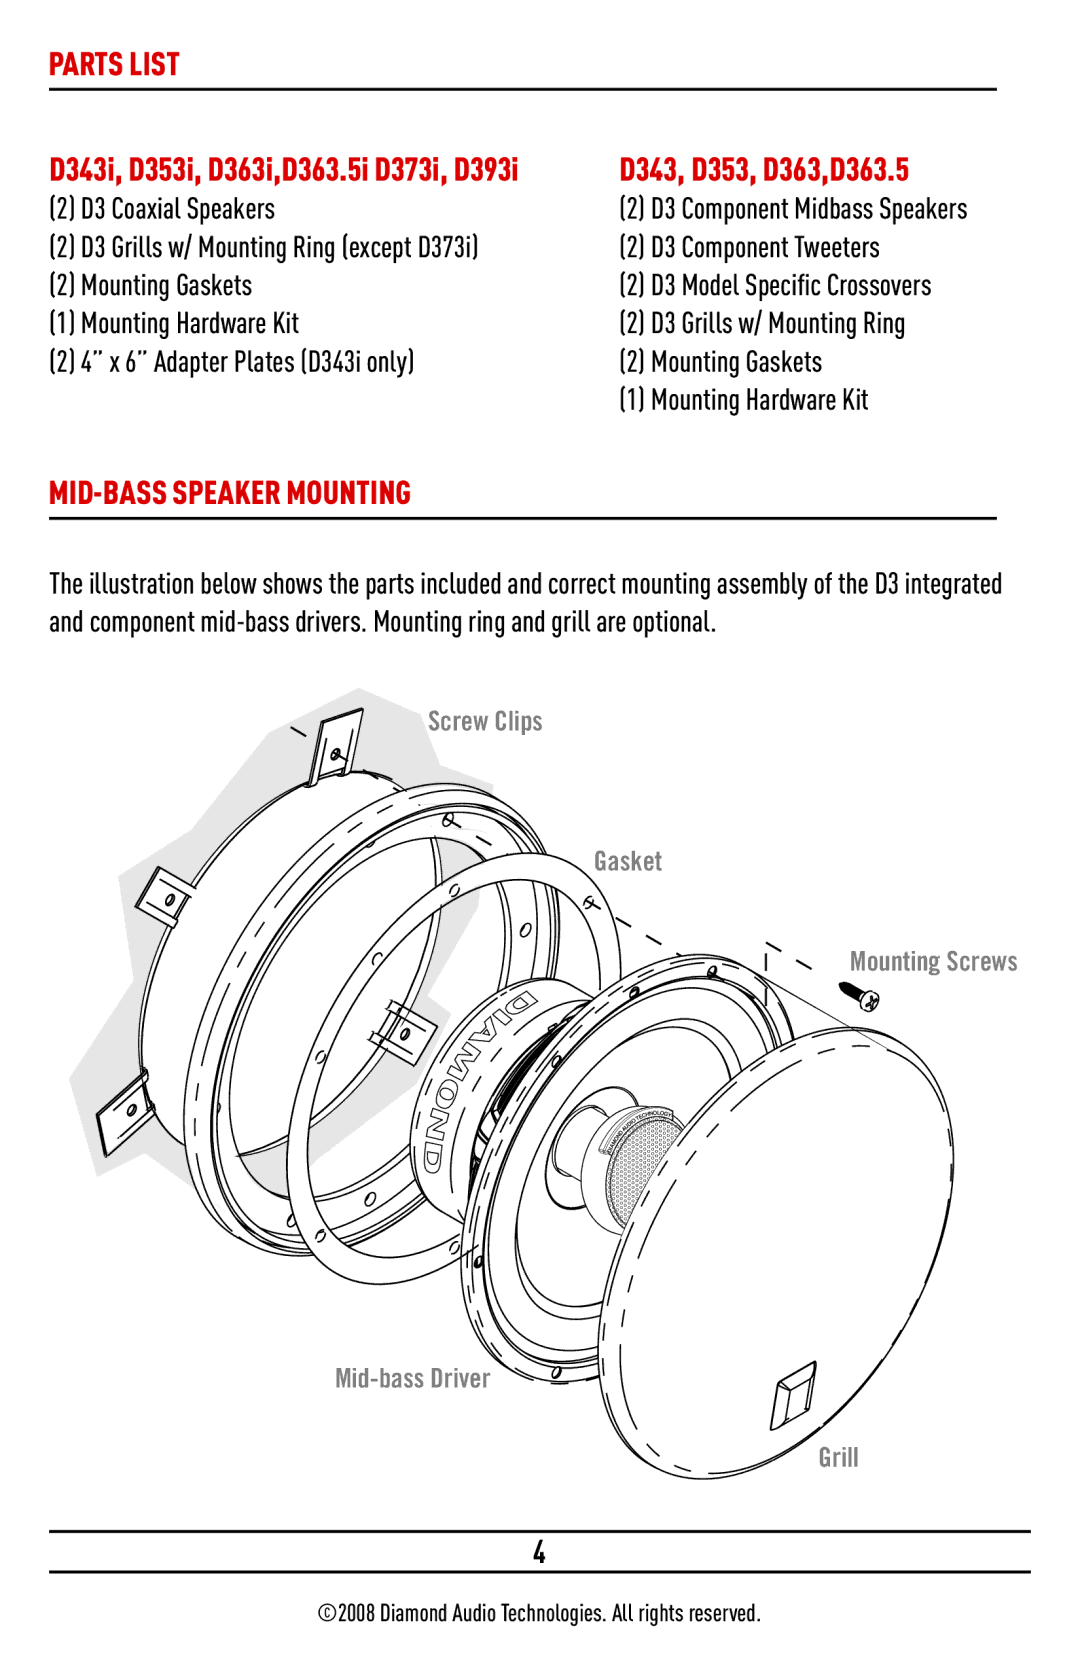 Diamond D393I, D373I, D363.5I, D343I, D363I, D353I installation manual Parts List, MID-BASS Speaker Mounting 